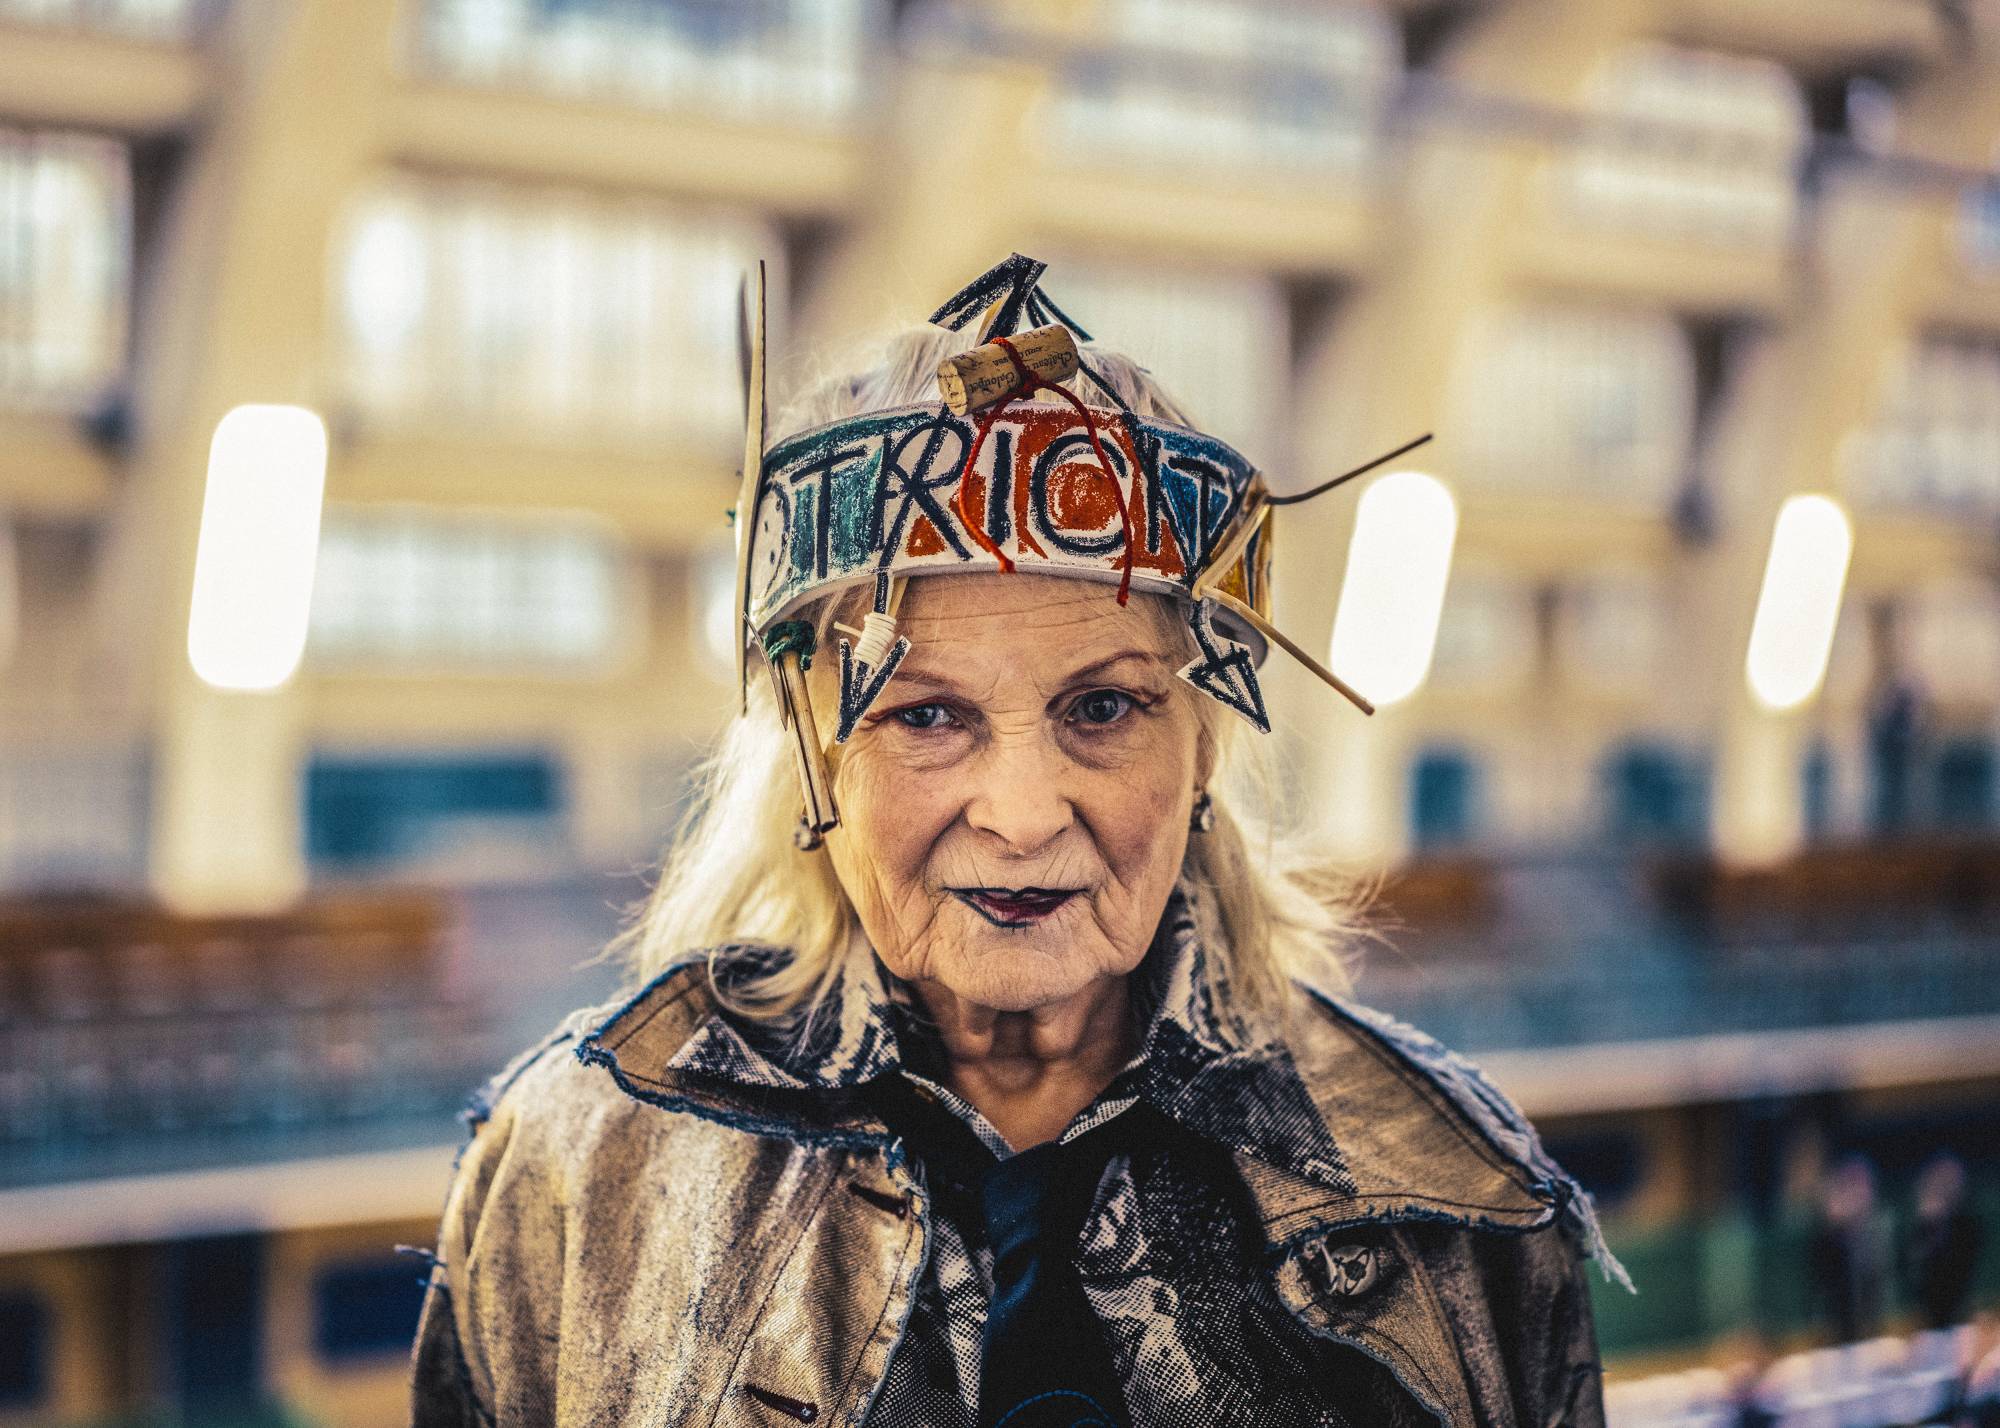 Vivienne Westwood, icon of provocative fashion, dead at 81 | The